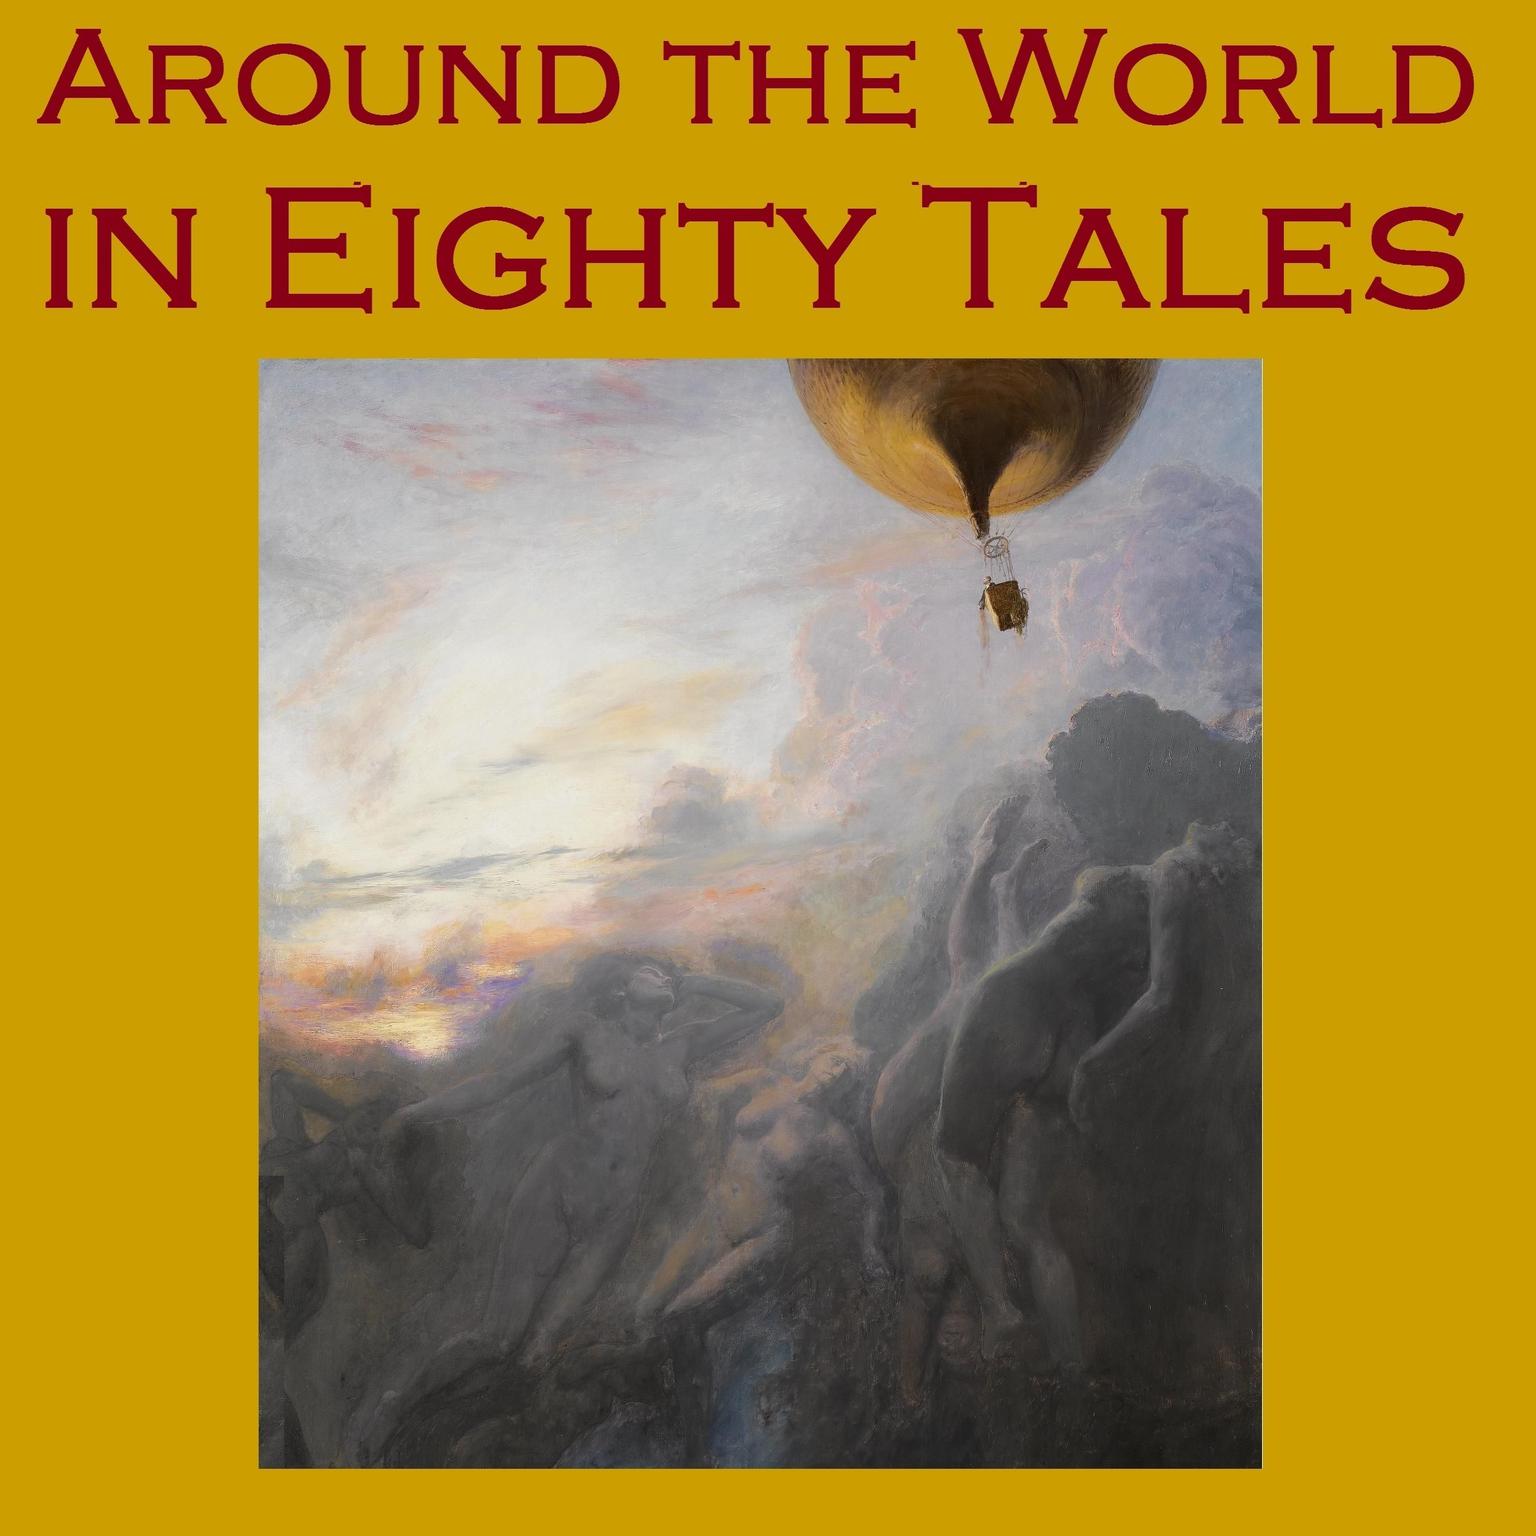 Around the World in Eighty Tales: Eighty Classic Stories from around the World Audiobook, by various authors